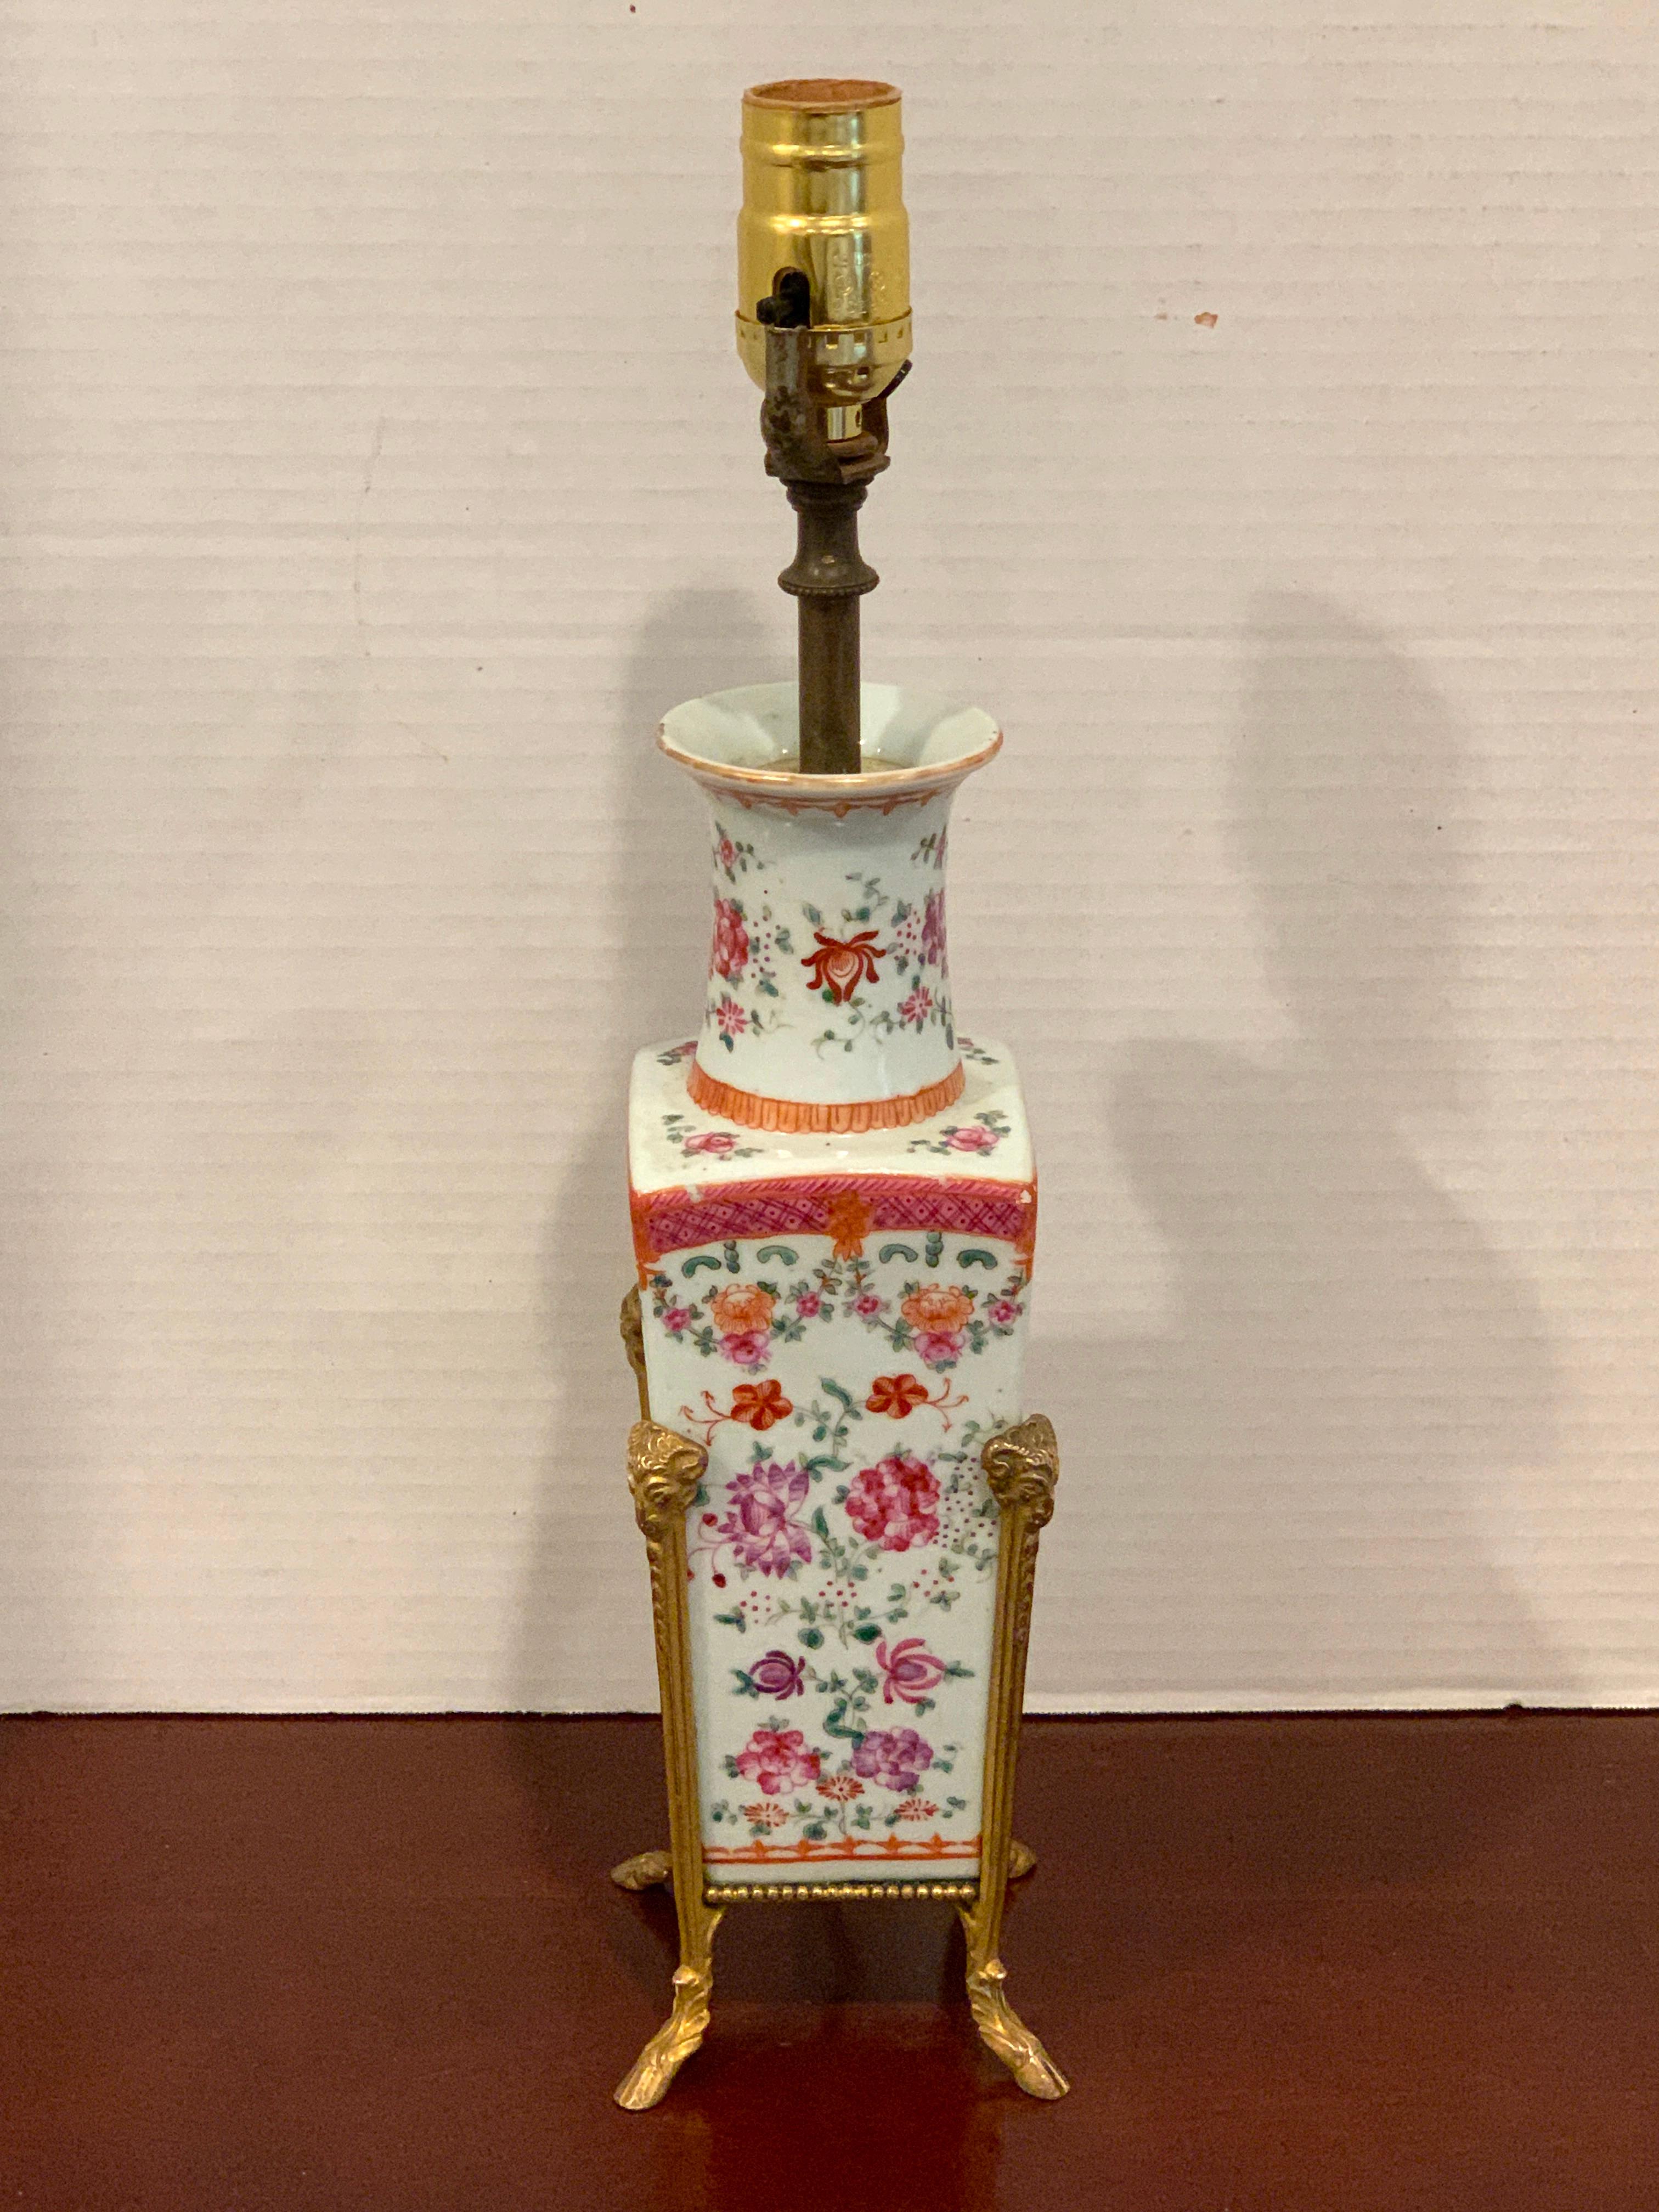 Chinese Export Famille rose ormolu mounted vase, now as a lamp, with typical delicate floral decoration, raised on a ormolu ram and hoof frame. 19th century vase, Lamp Mounts, circa 1925
The height to the top of socket is 16